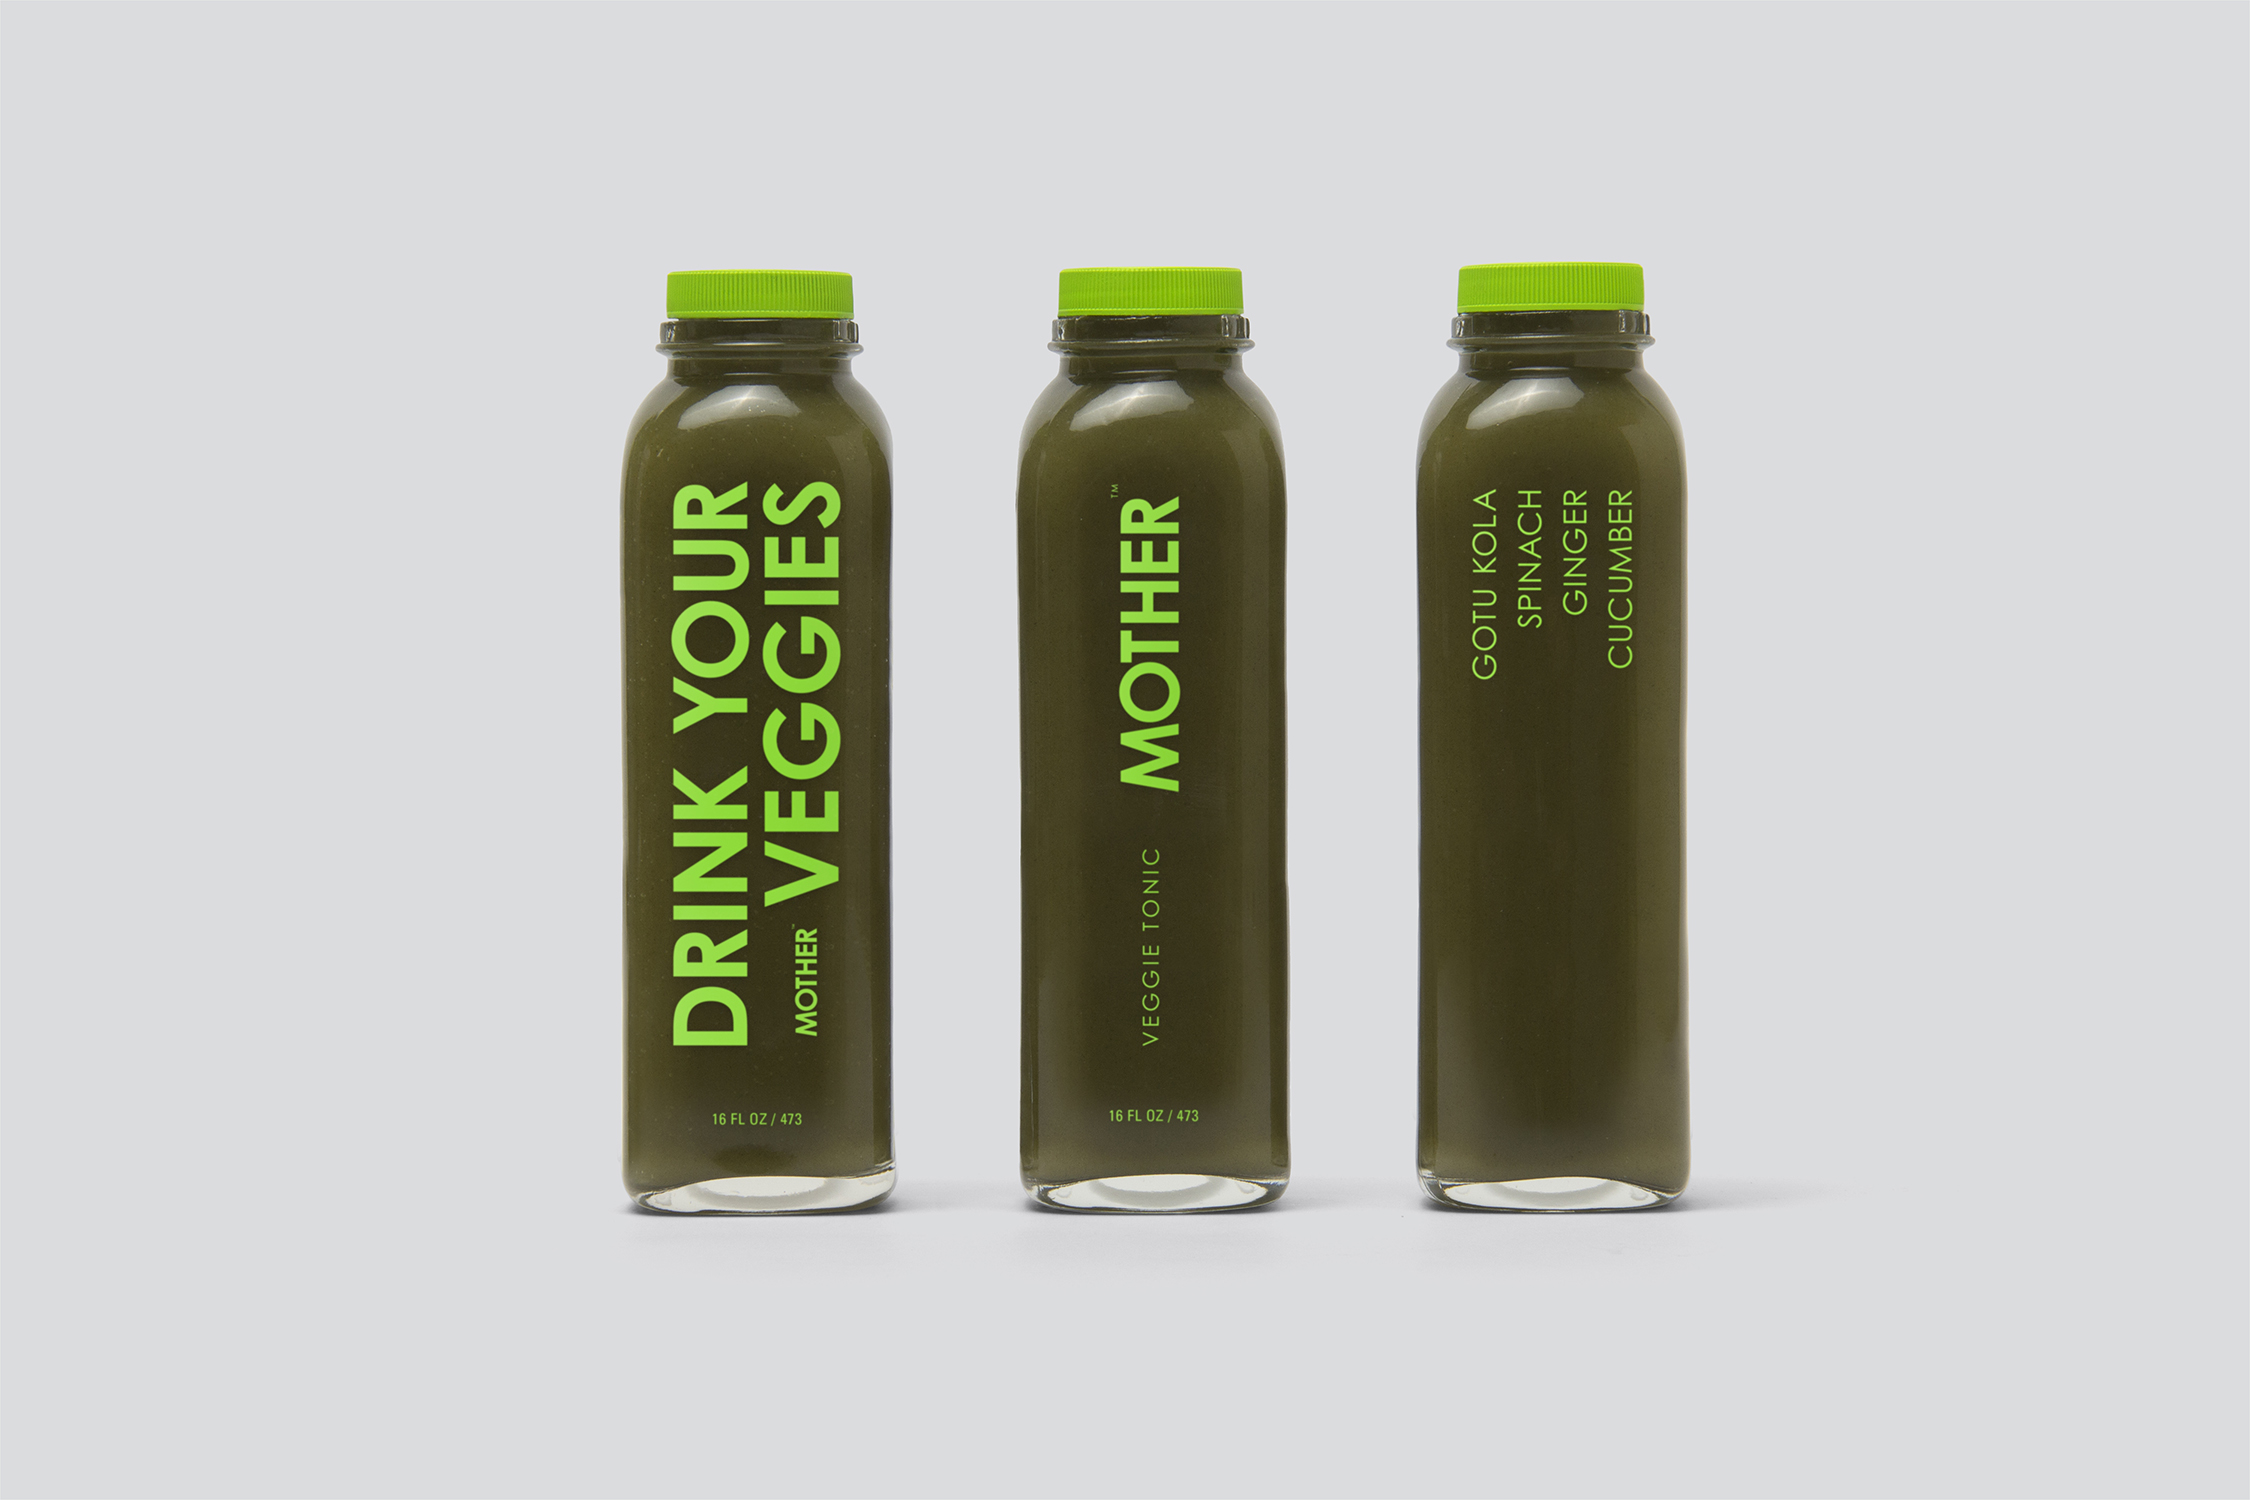 Veggie Drink Brand Creation for Health Food Beverage Category for North American Markets